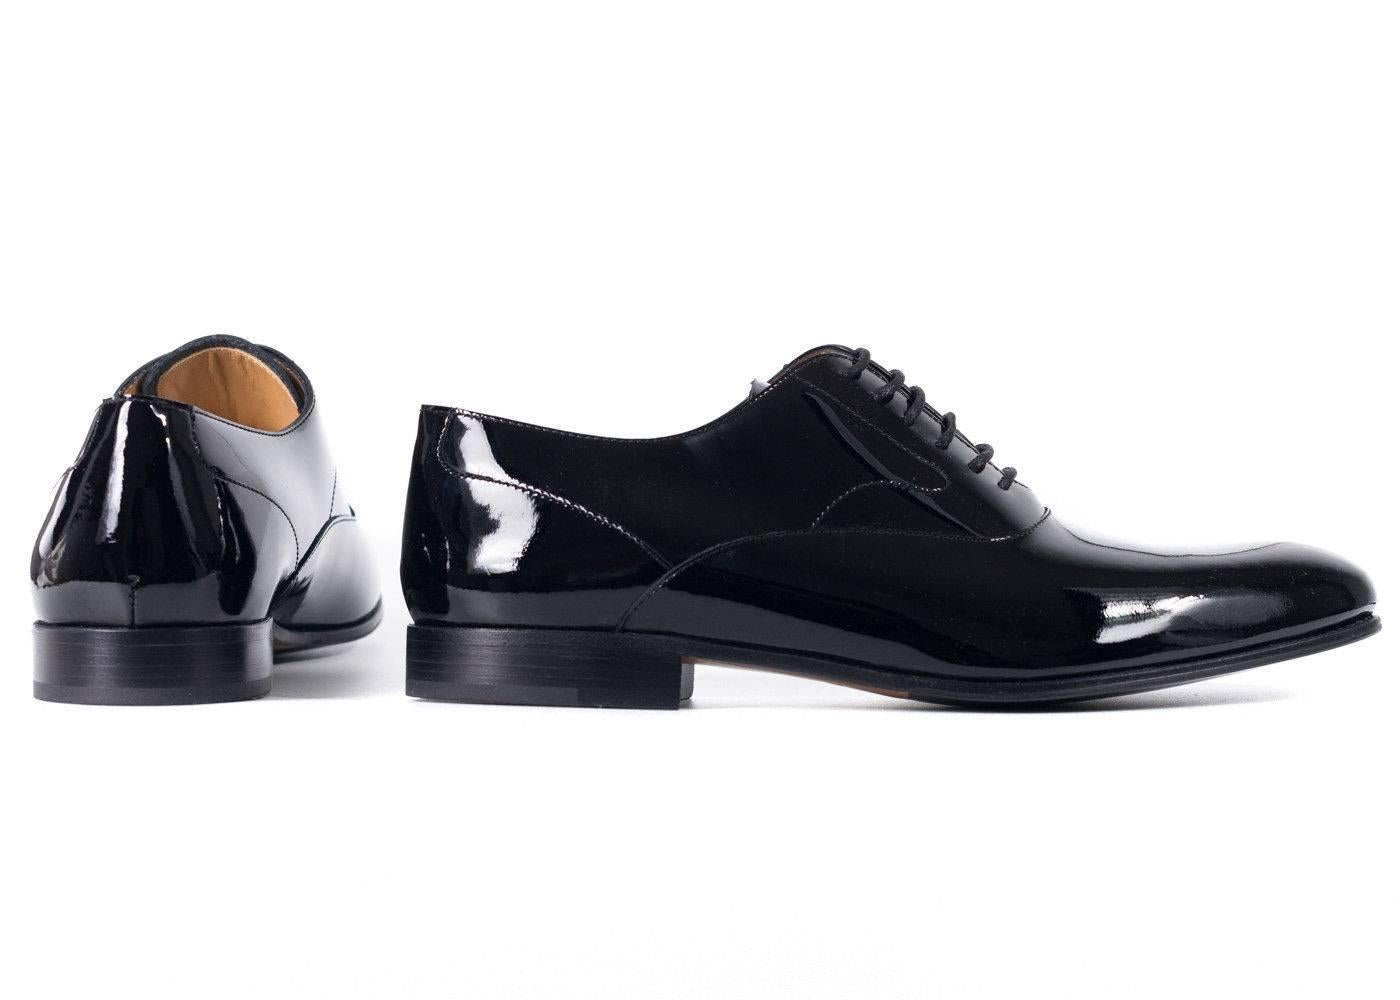 The Valentino Patent Leather Oxfords are ideal for that special event. Whip these out and pair them with that all black Tuxedo outfit. These high shine oxfords have a functional lace up feature and are perfect for standing out with